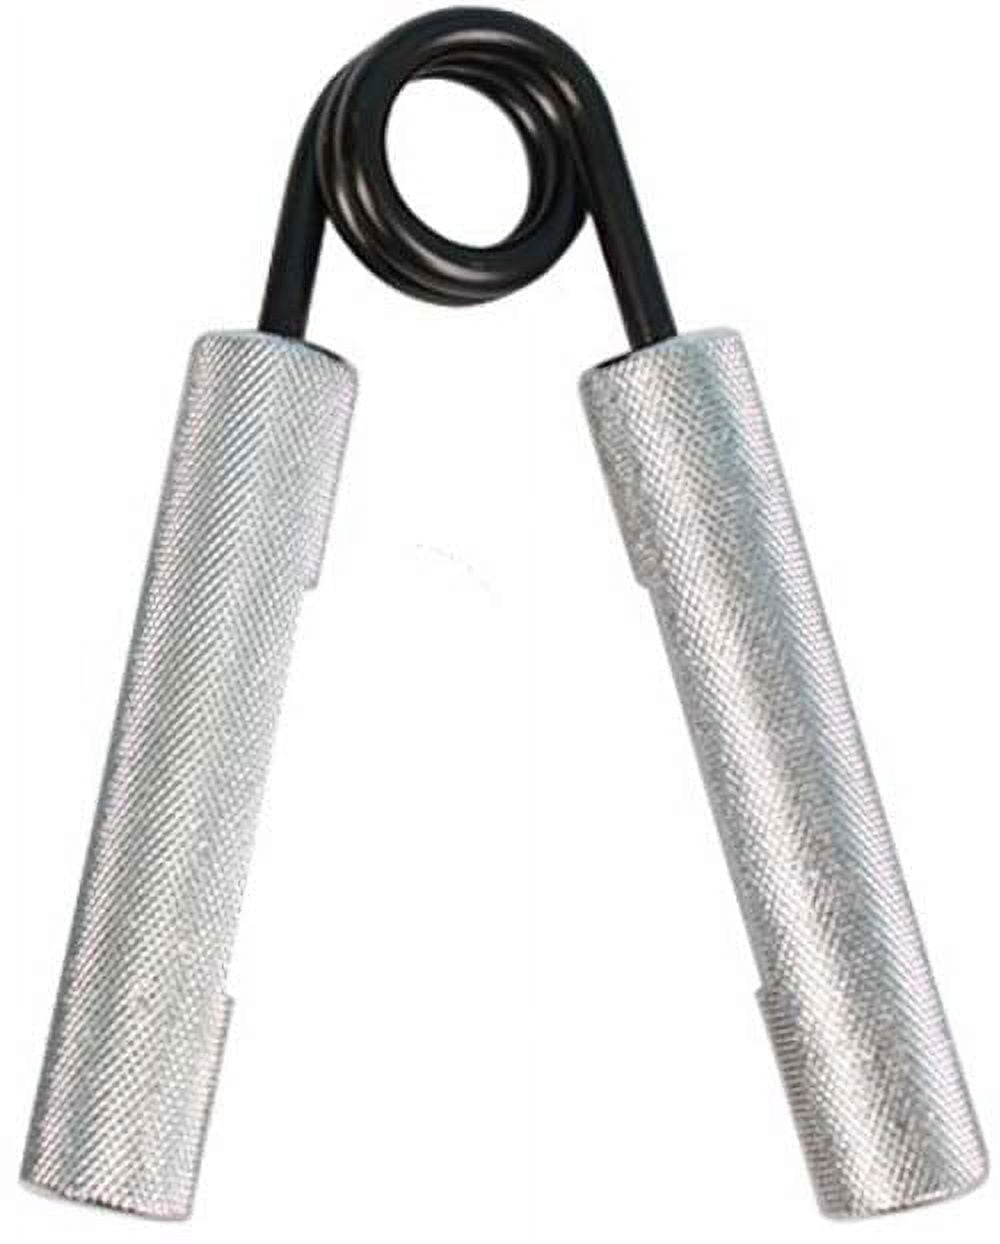 Heavy Grip Hand Grippers 100 lb. 